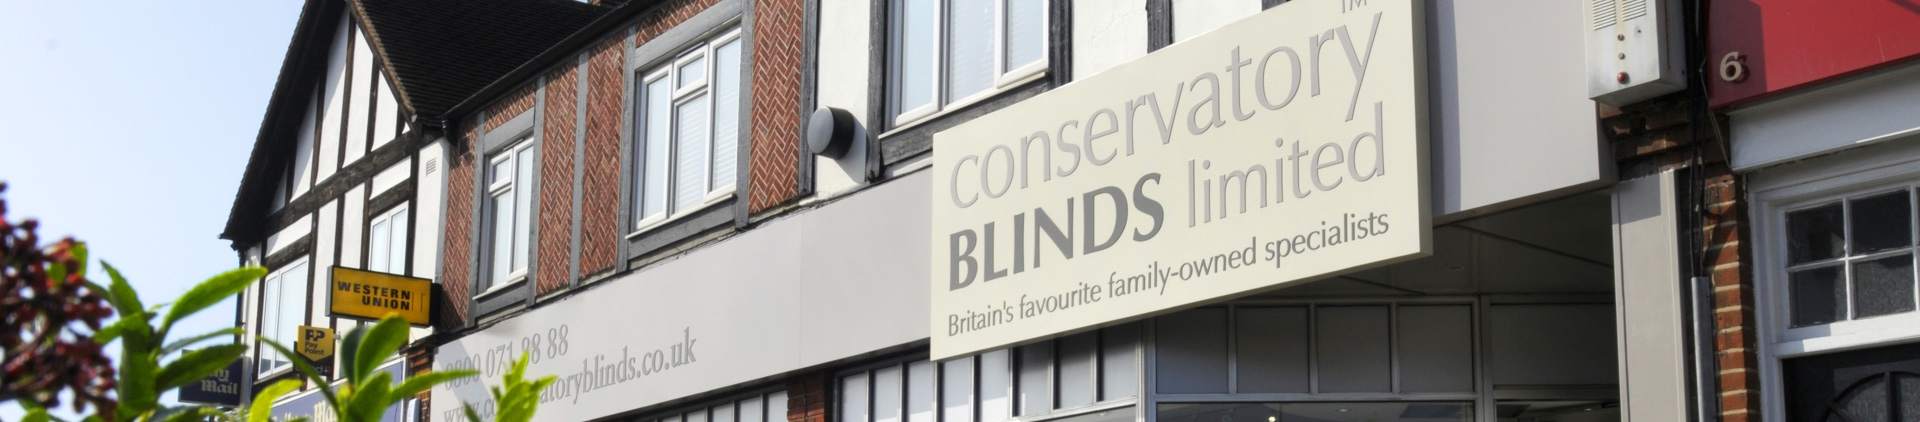 Conservatory Blinds Limited